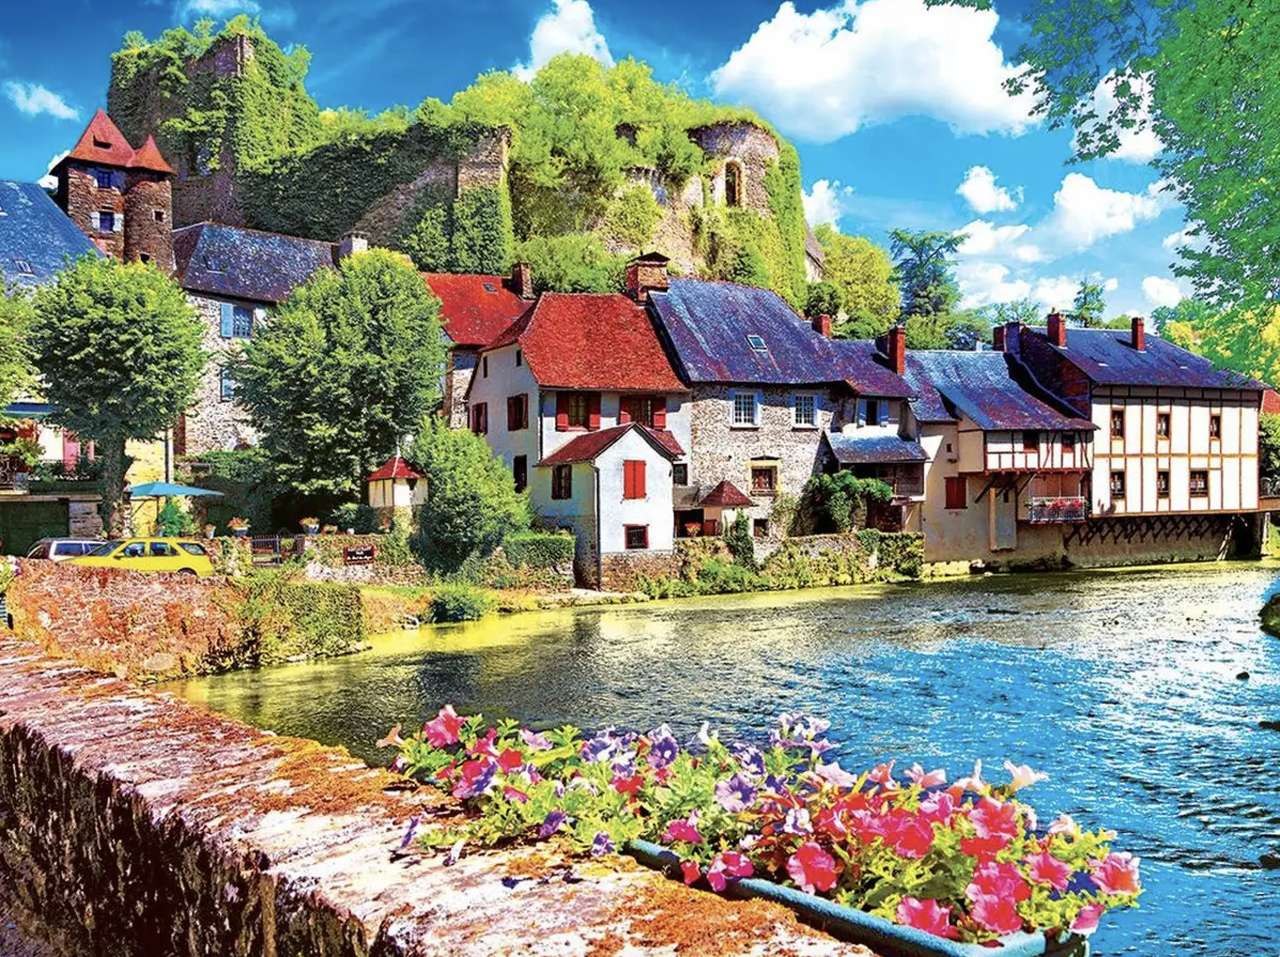 France-Ruins of the Segur-le-Chateau castle in a small village jigsaw puzzle online